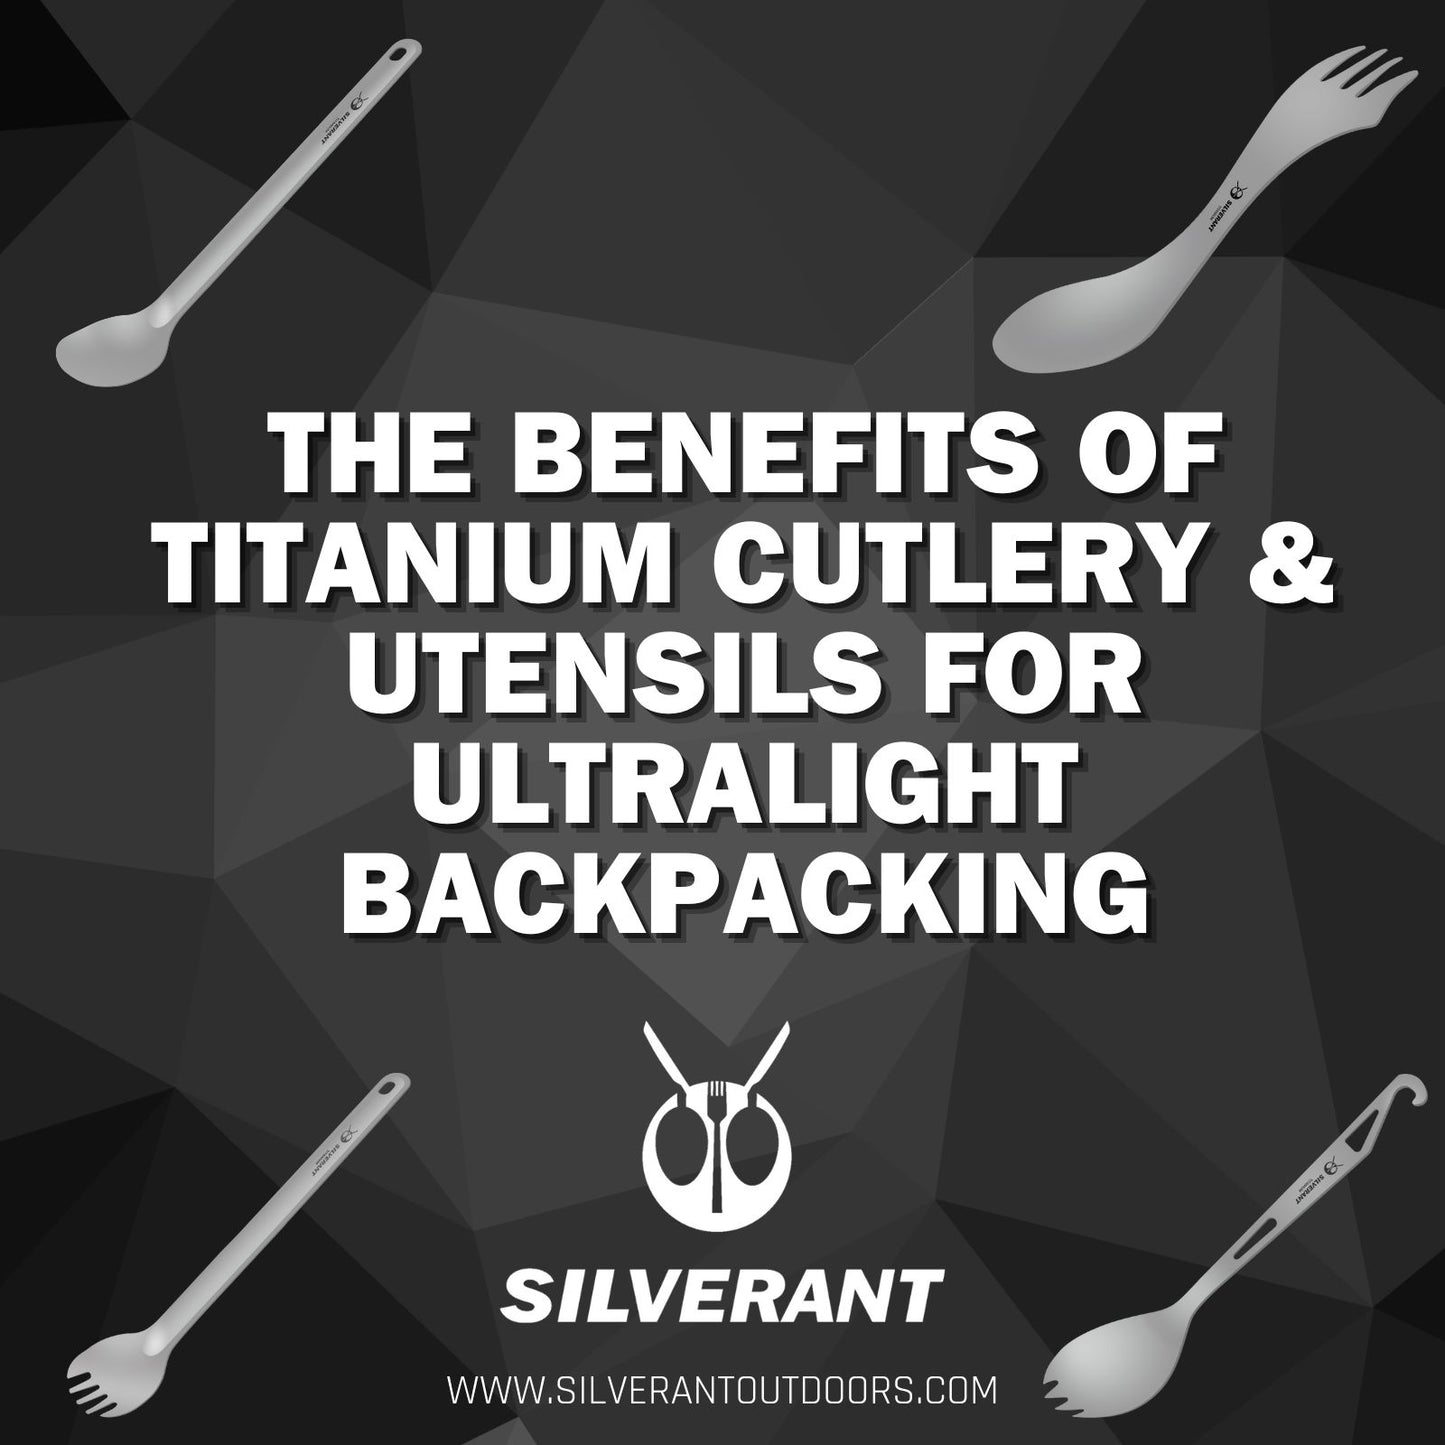 The Benefits of Titanium Cutlery & Utensils for Ultralight Backpacking